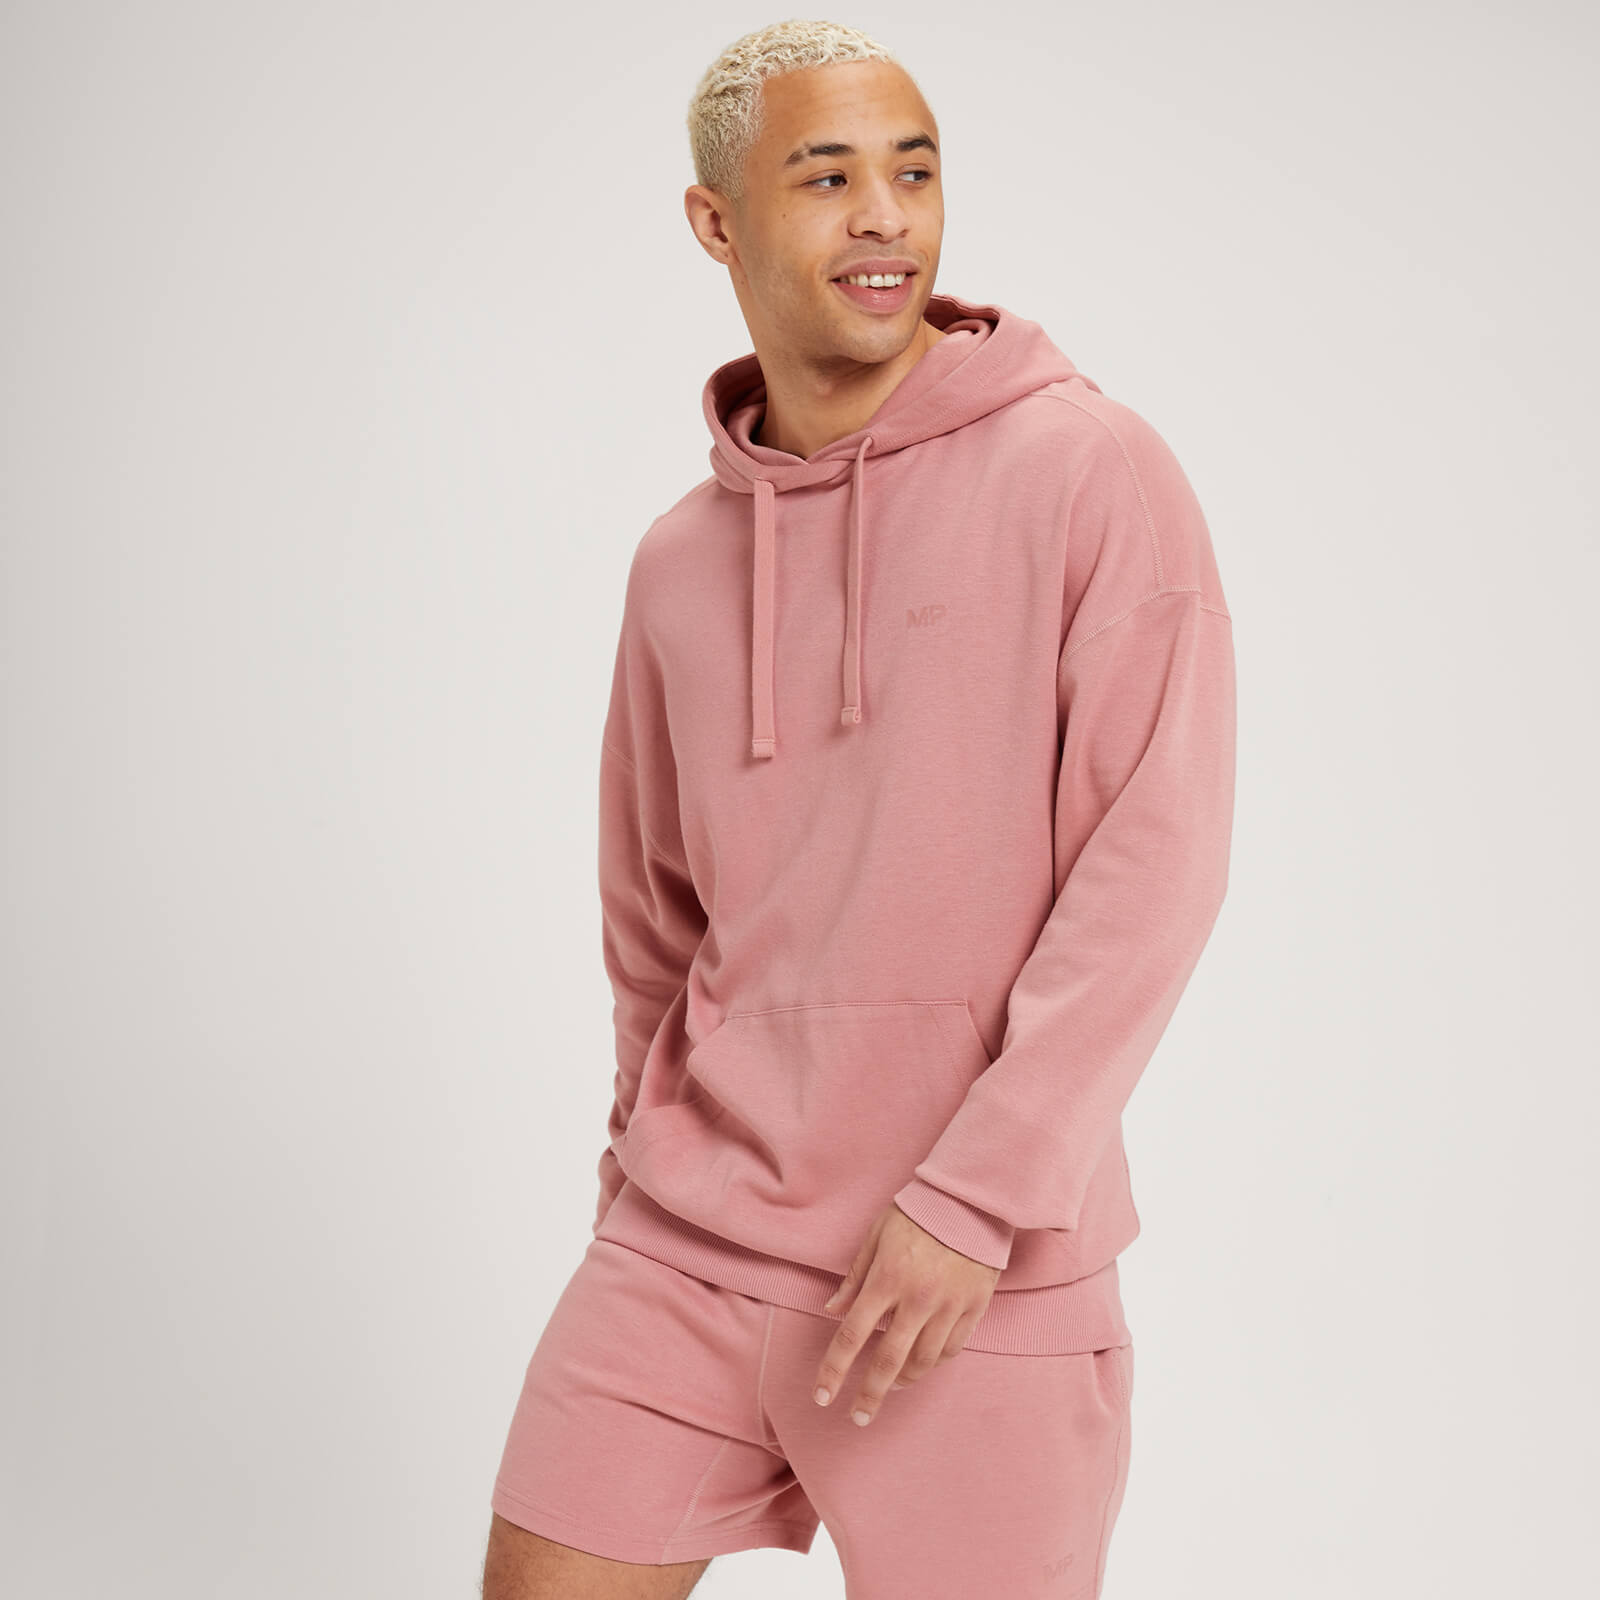 MP Men's Composure Hoodie - Washed Pink - S